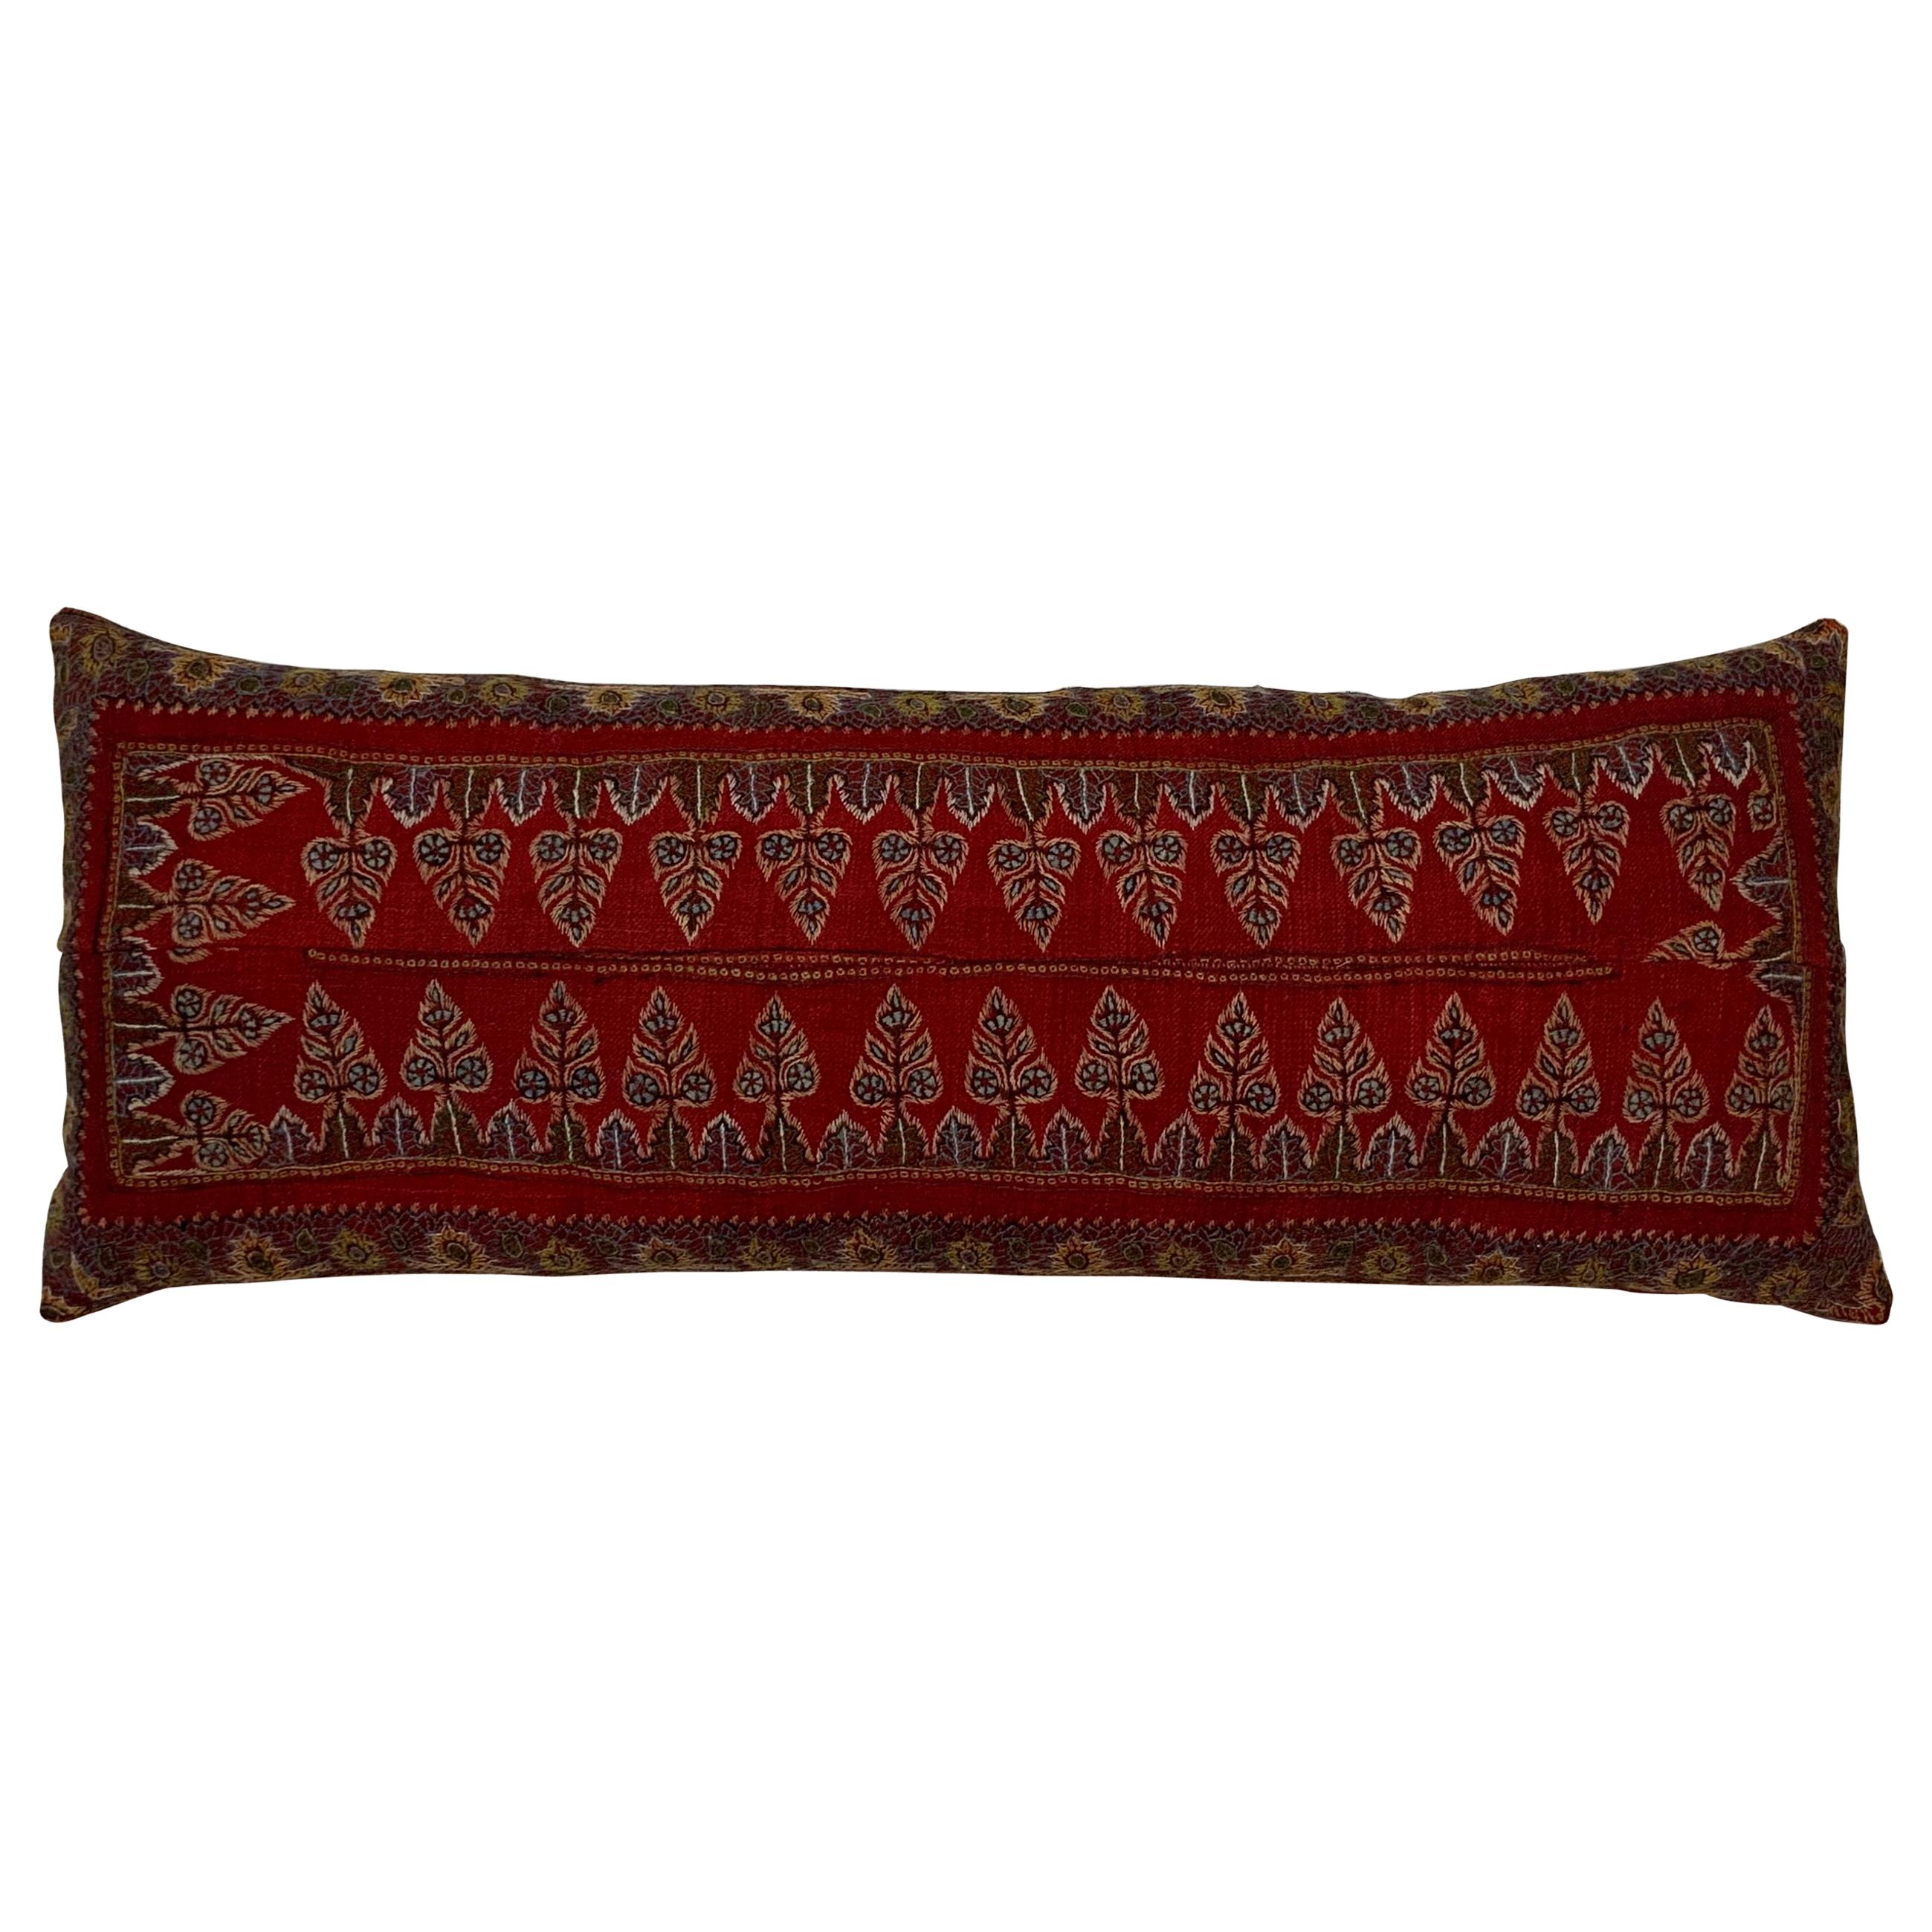 Single Hand Antique Embroidery Suzani Pillow